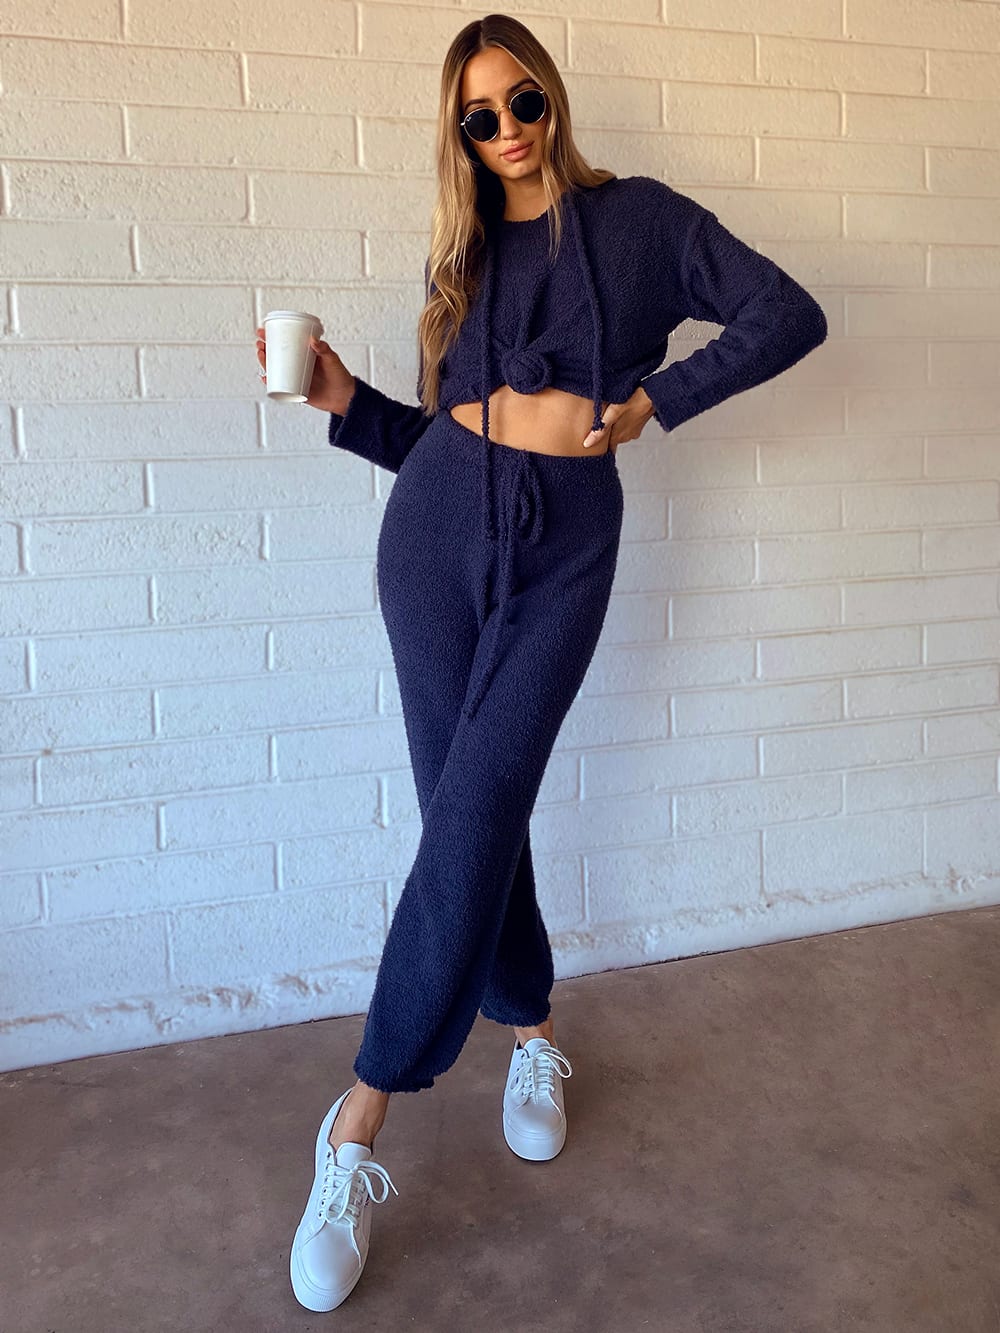 Women's Loungewear Outfits: How to Upstyle Your Loungewear -   Fashion Blog